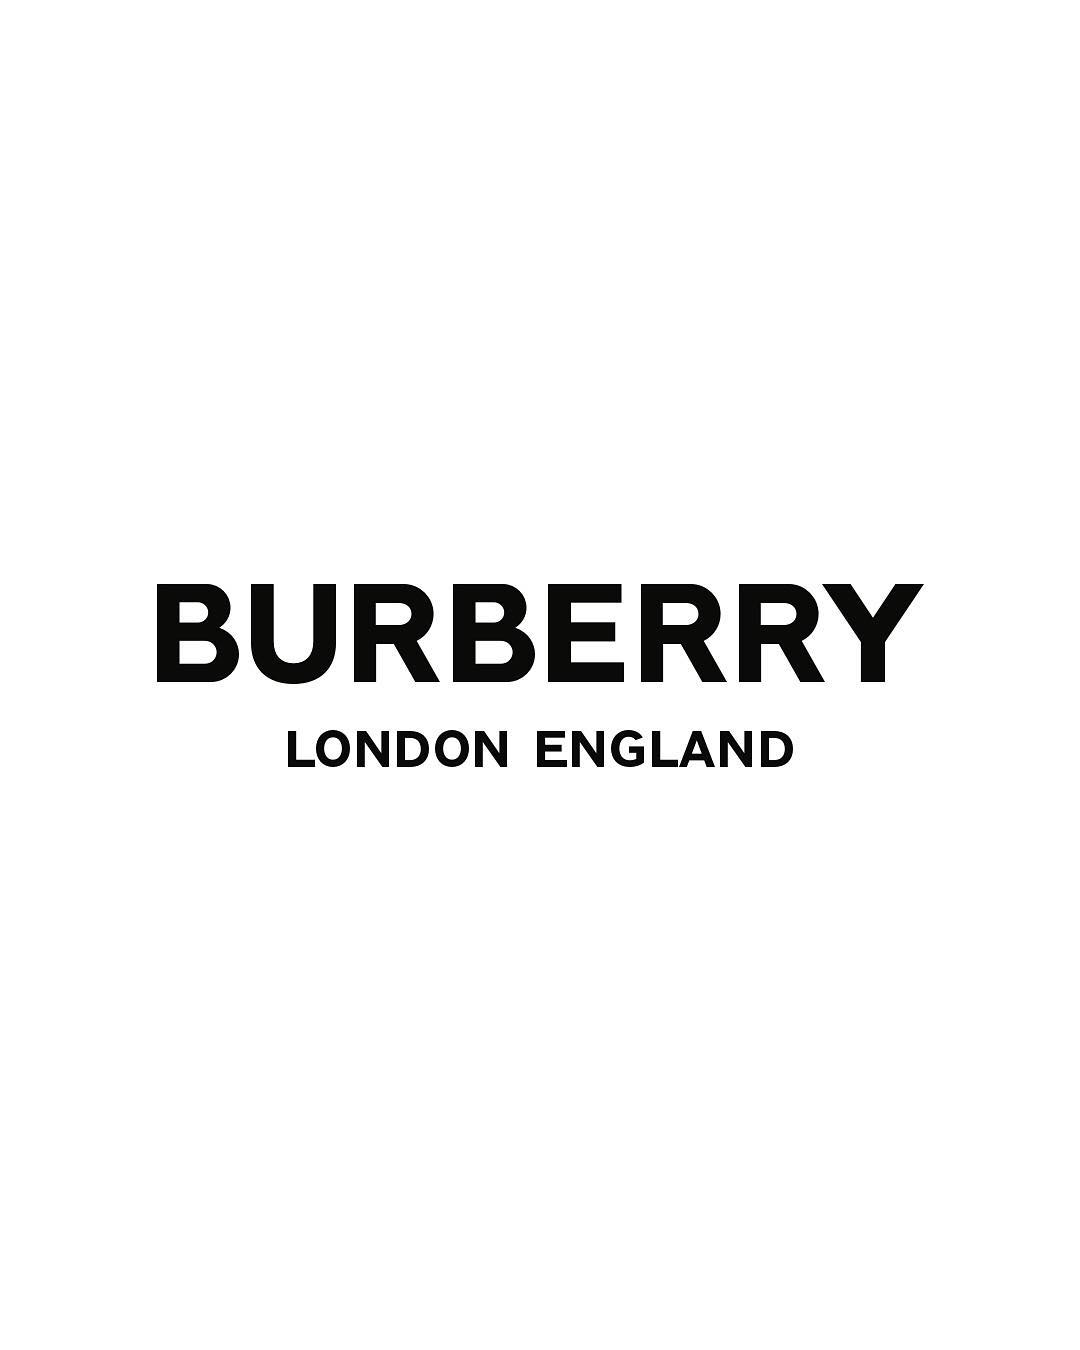 Detailed Black and White Brand Logo - Burberry unveils new logo for first time in 20 years under Riccardo